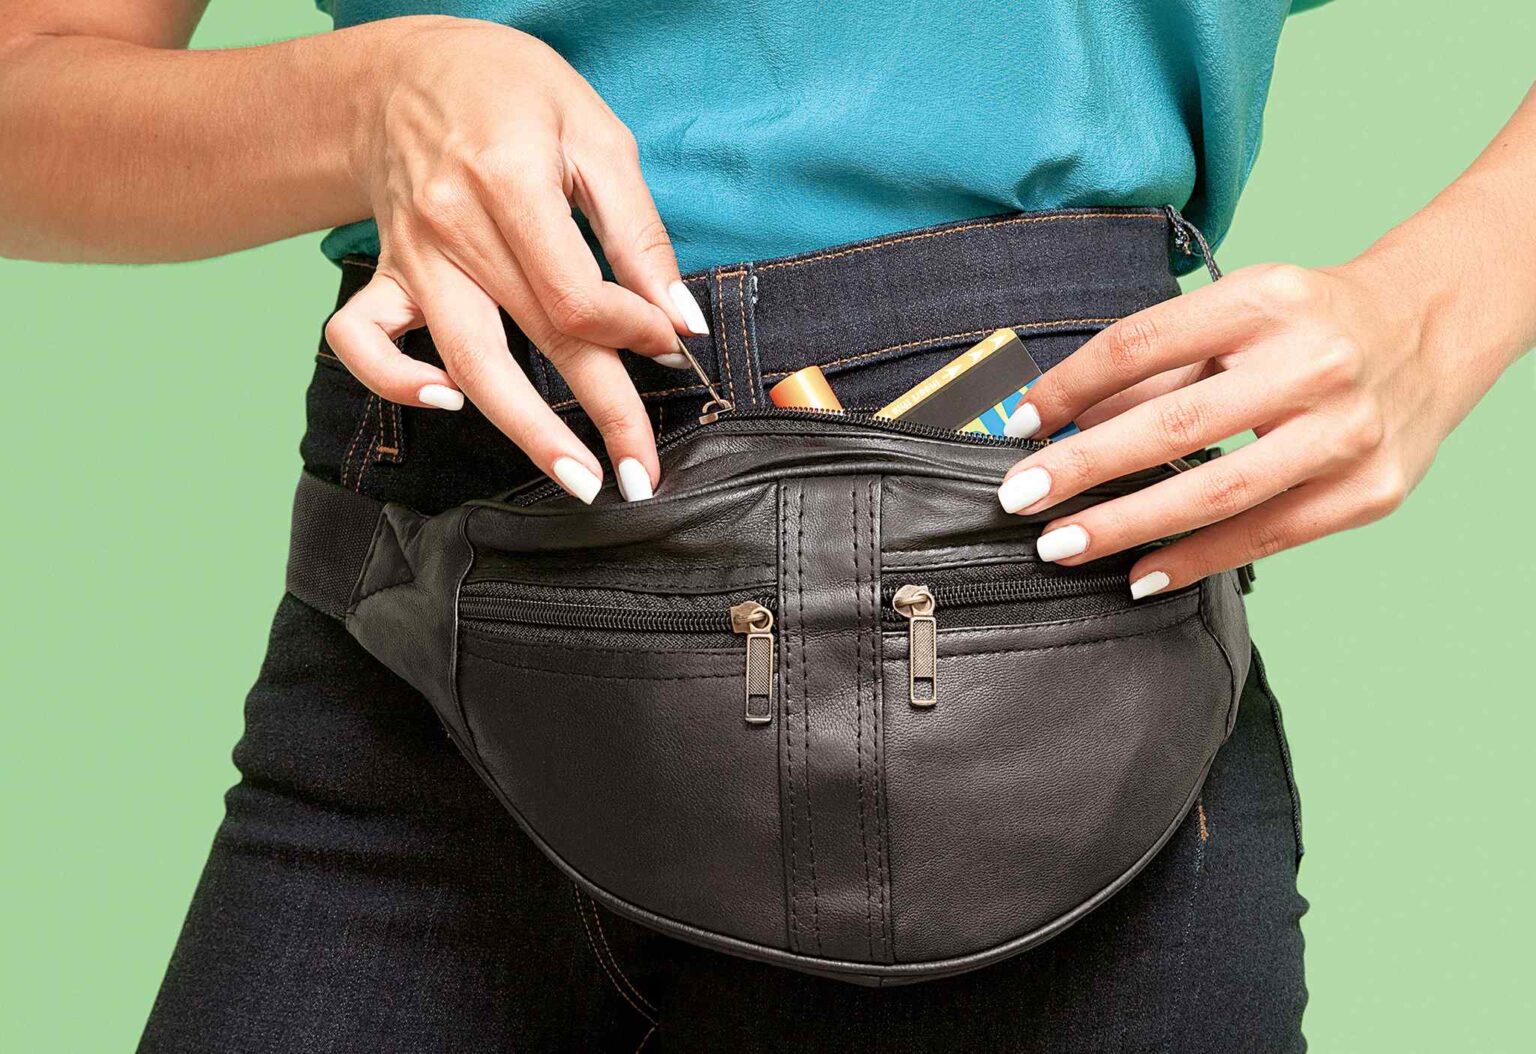 Fanny packs are a style trend that's poised for a comeback. Find out why you may need to revisit your opinion on fanny packs here.